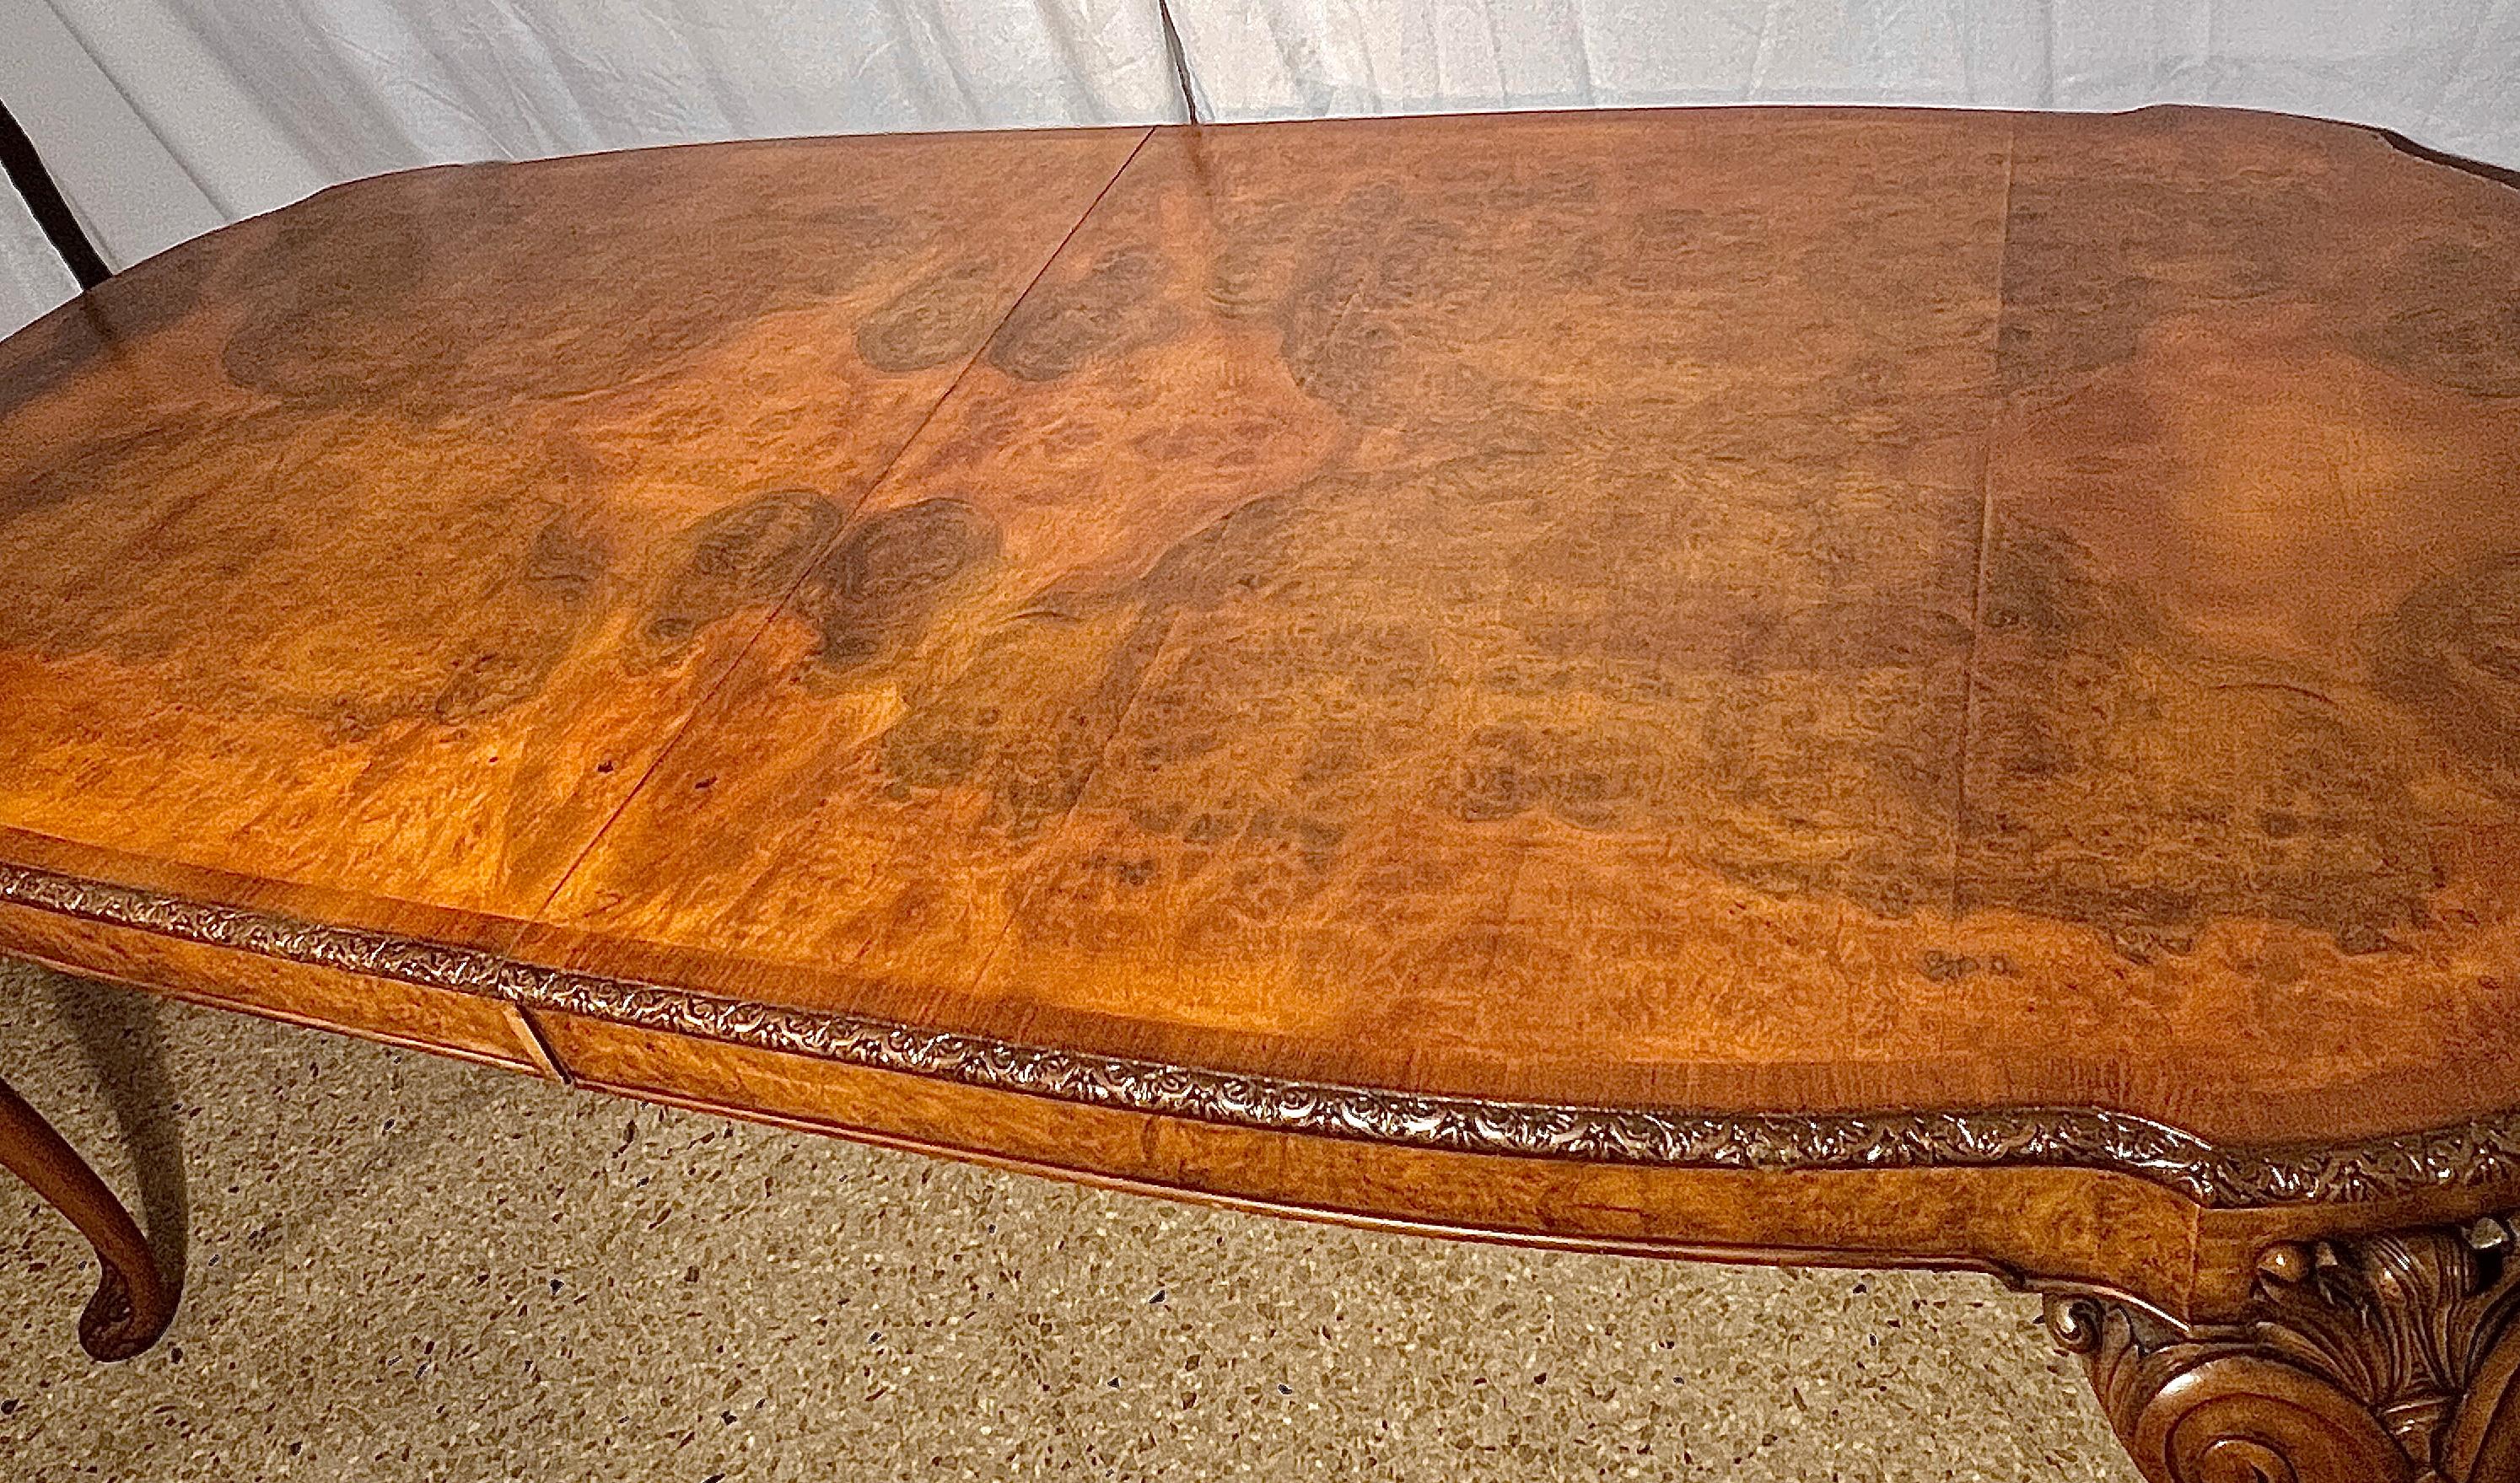 Antique English Carved Burled Walnut Dining Table with Interior Leaf, Circa 1900 For Sale 1